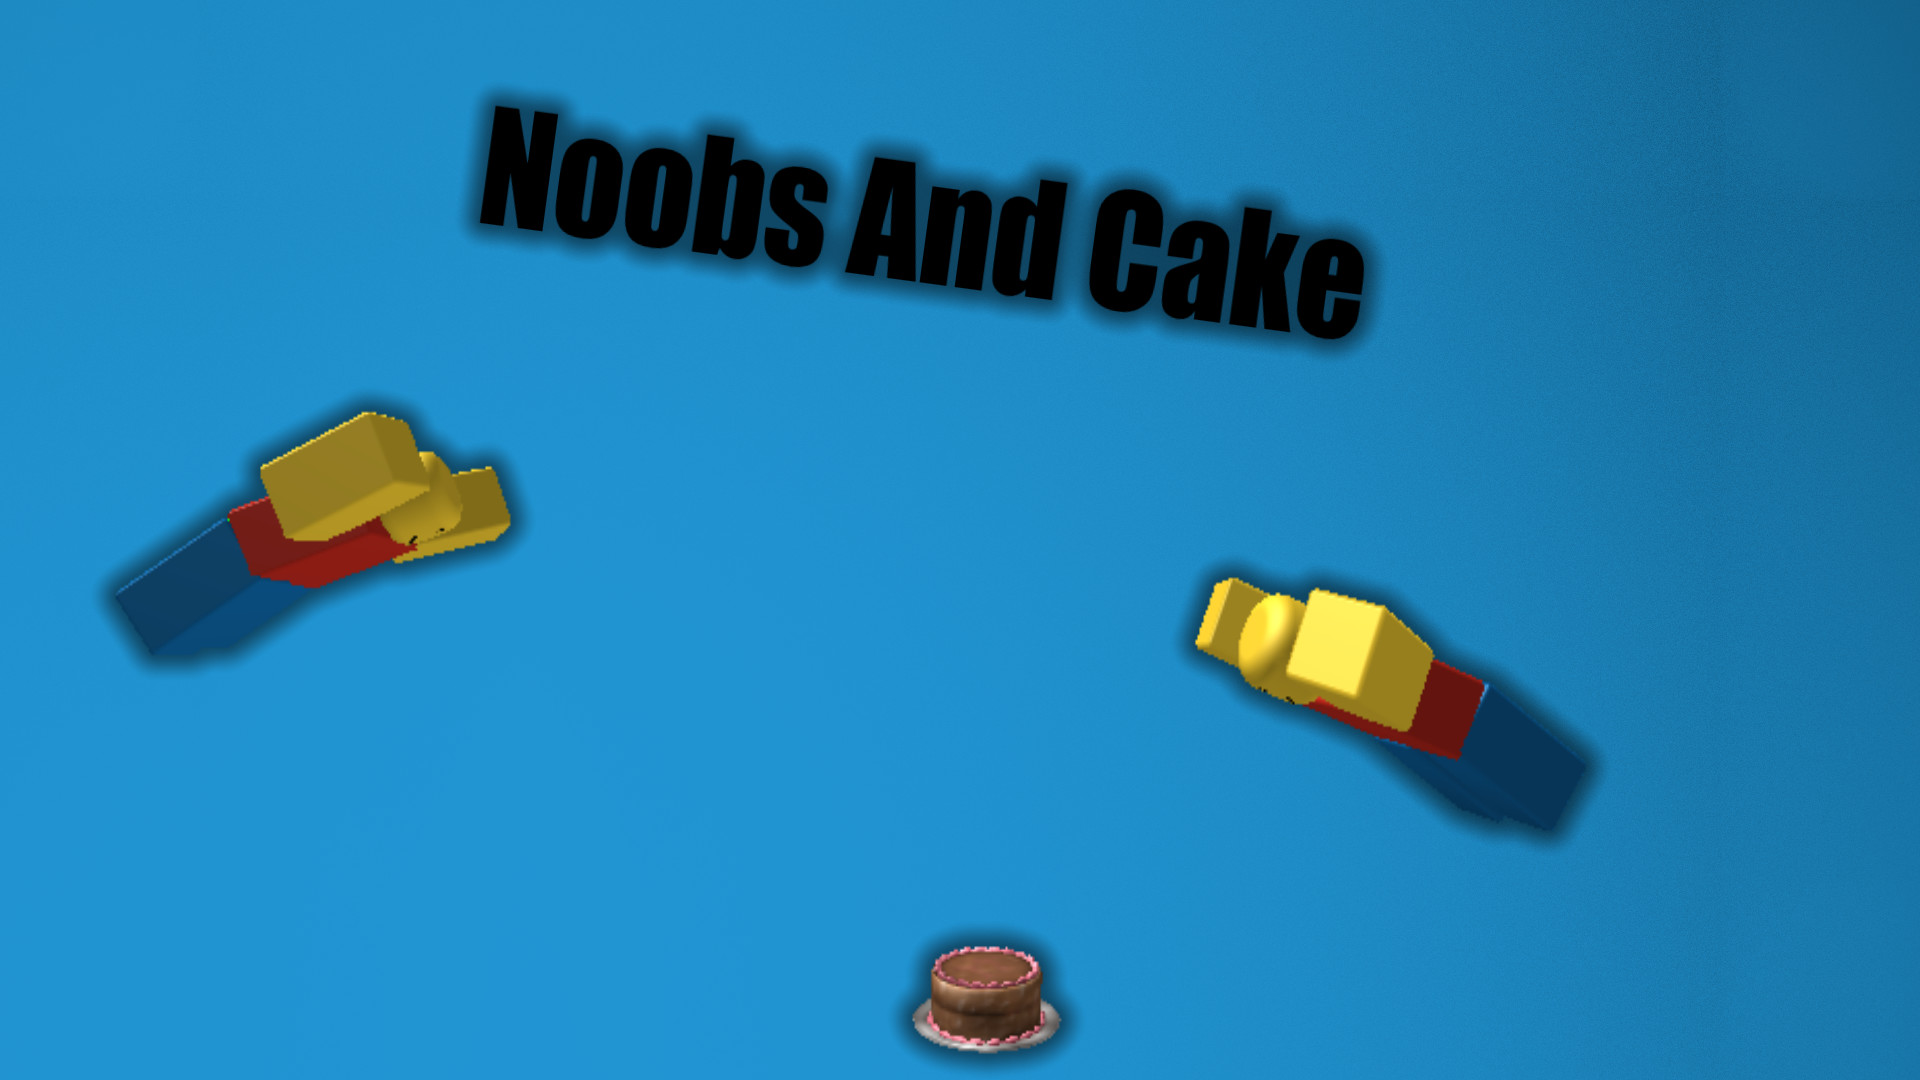 1920x1080 ... Noobs and cake a free roblox wallpaper by ExionTV